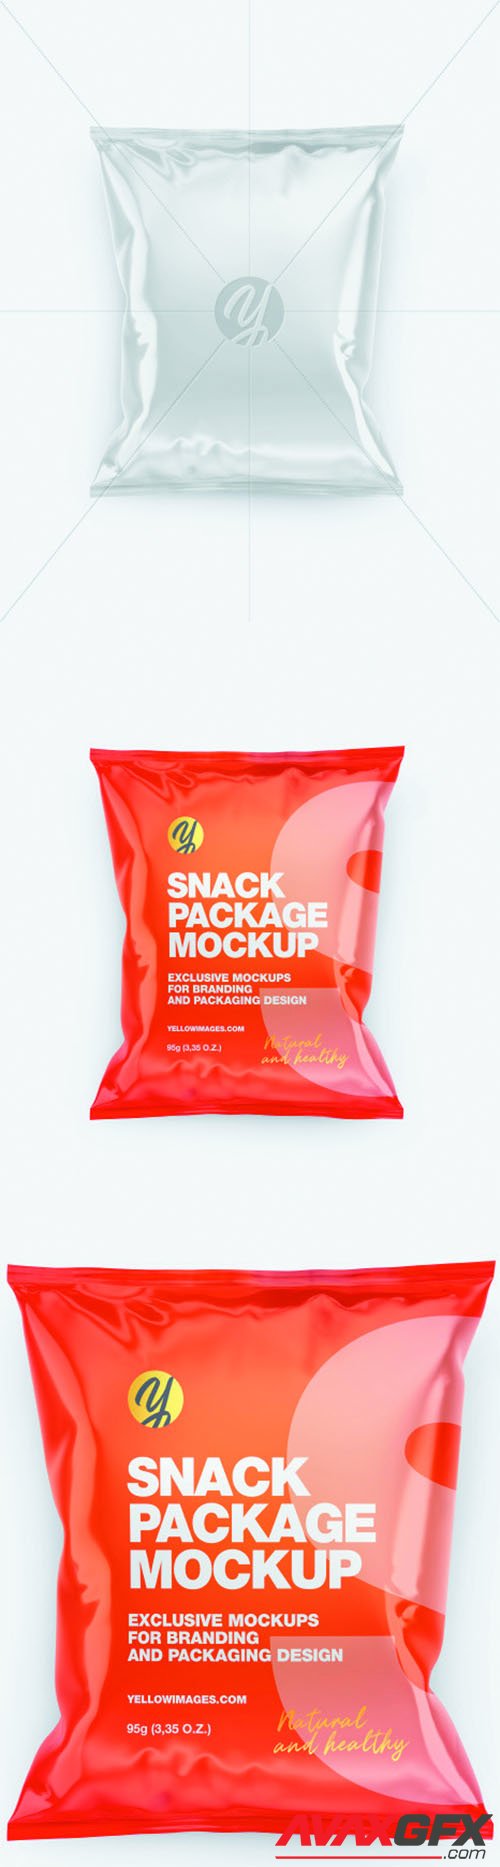 Glossy Snack Package Mockup 66017